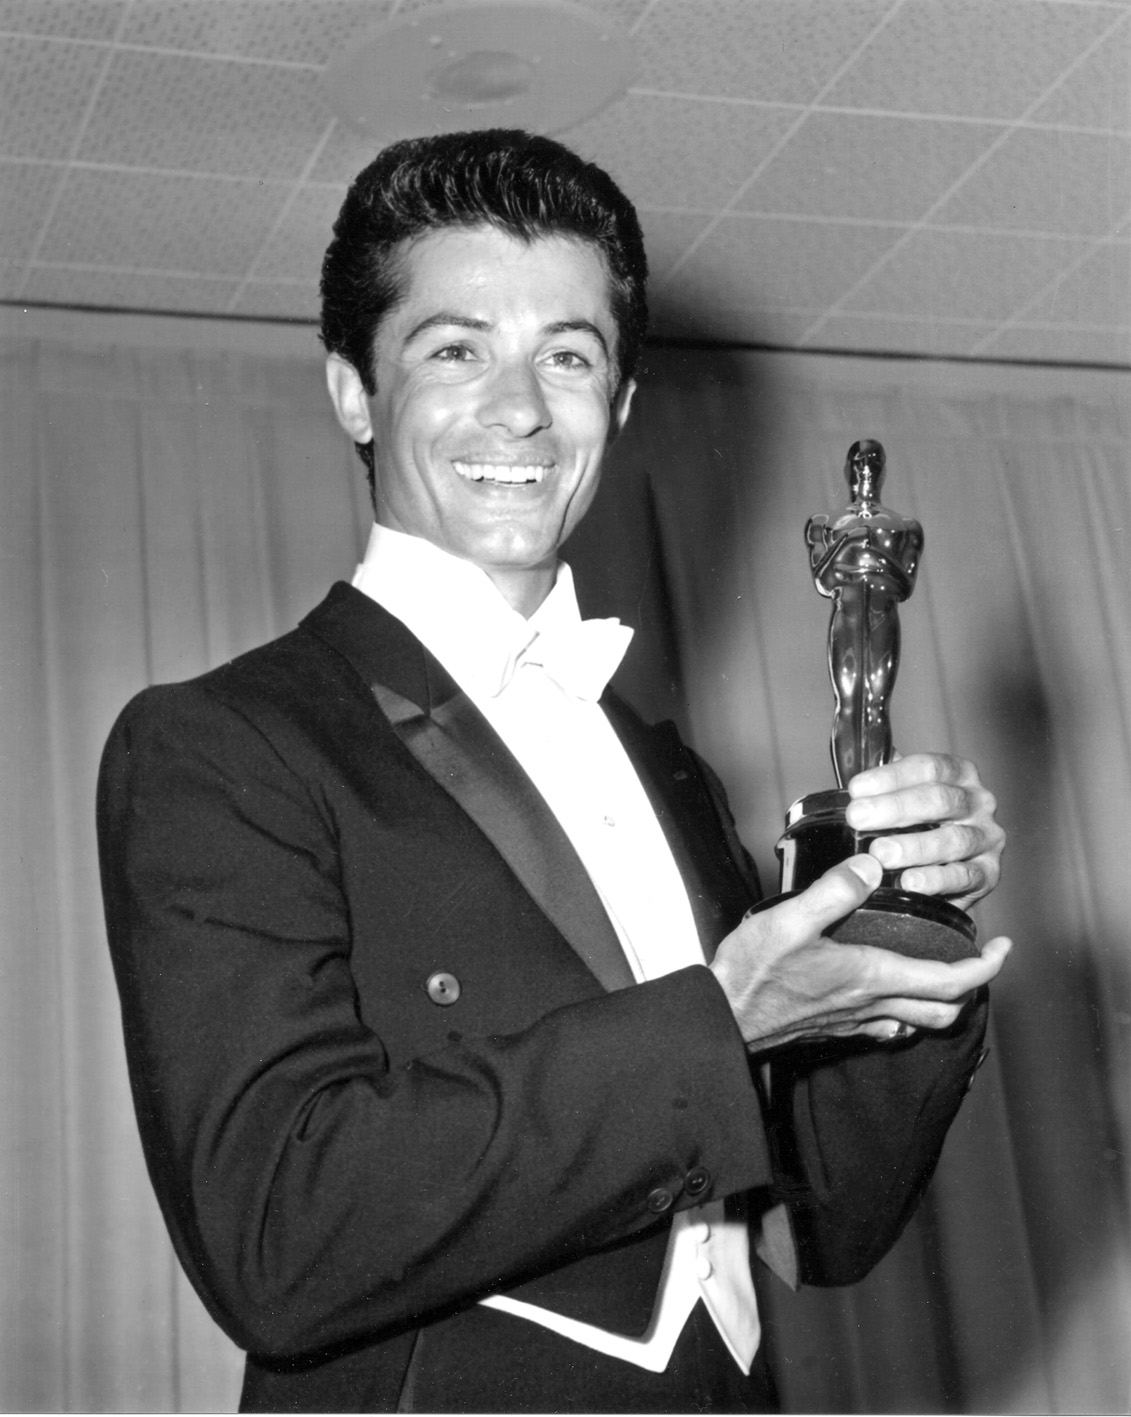 April 8, 1962 Best Actor in a Supporting Role for West Side Story in 1961